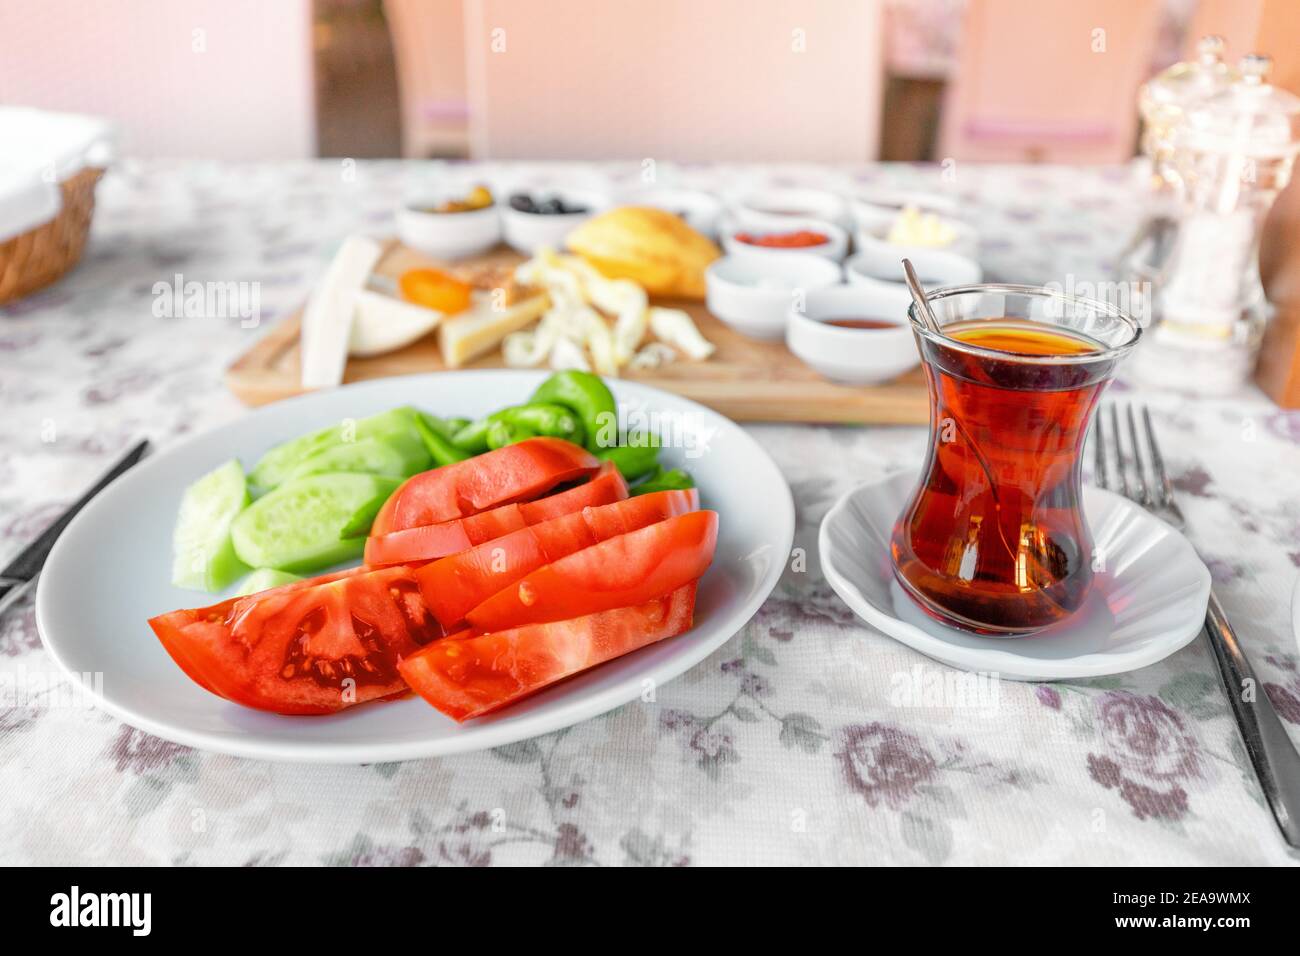 Traditional Turkish glass with strong tea, vegetables and other snacks for a rich middle eastern Breakfast in the outdoor restaurant Stock Photo